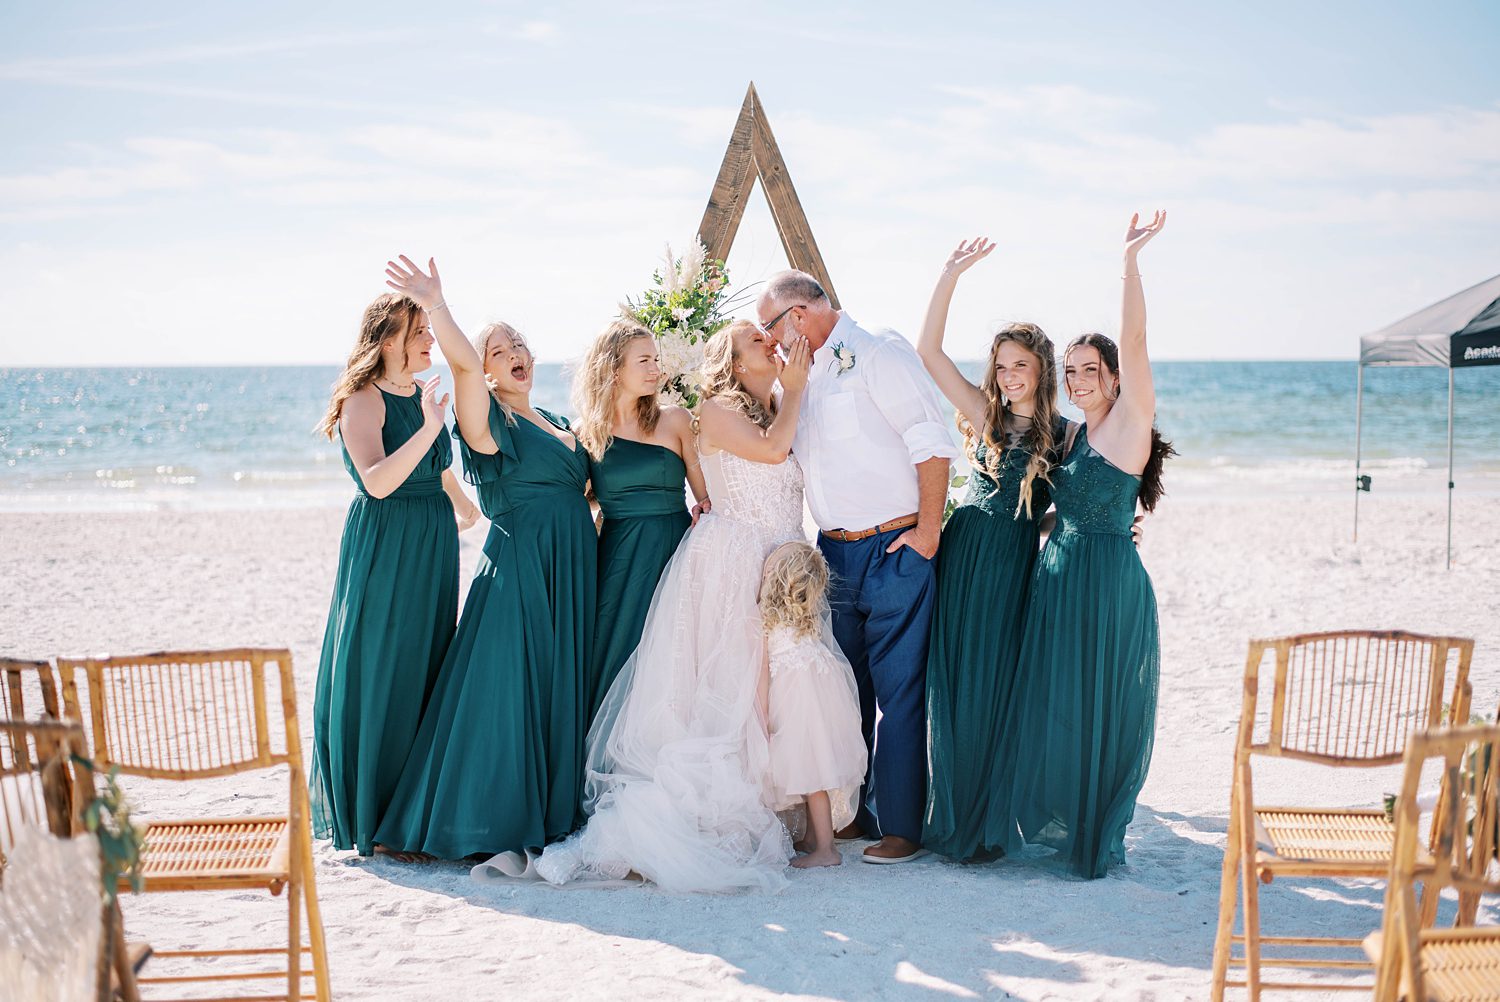 newlyweds kiss by wooden arbor with daughters in teal dresses cheering